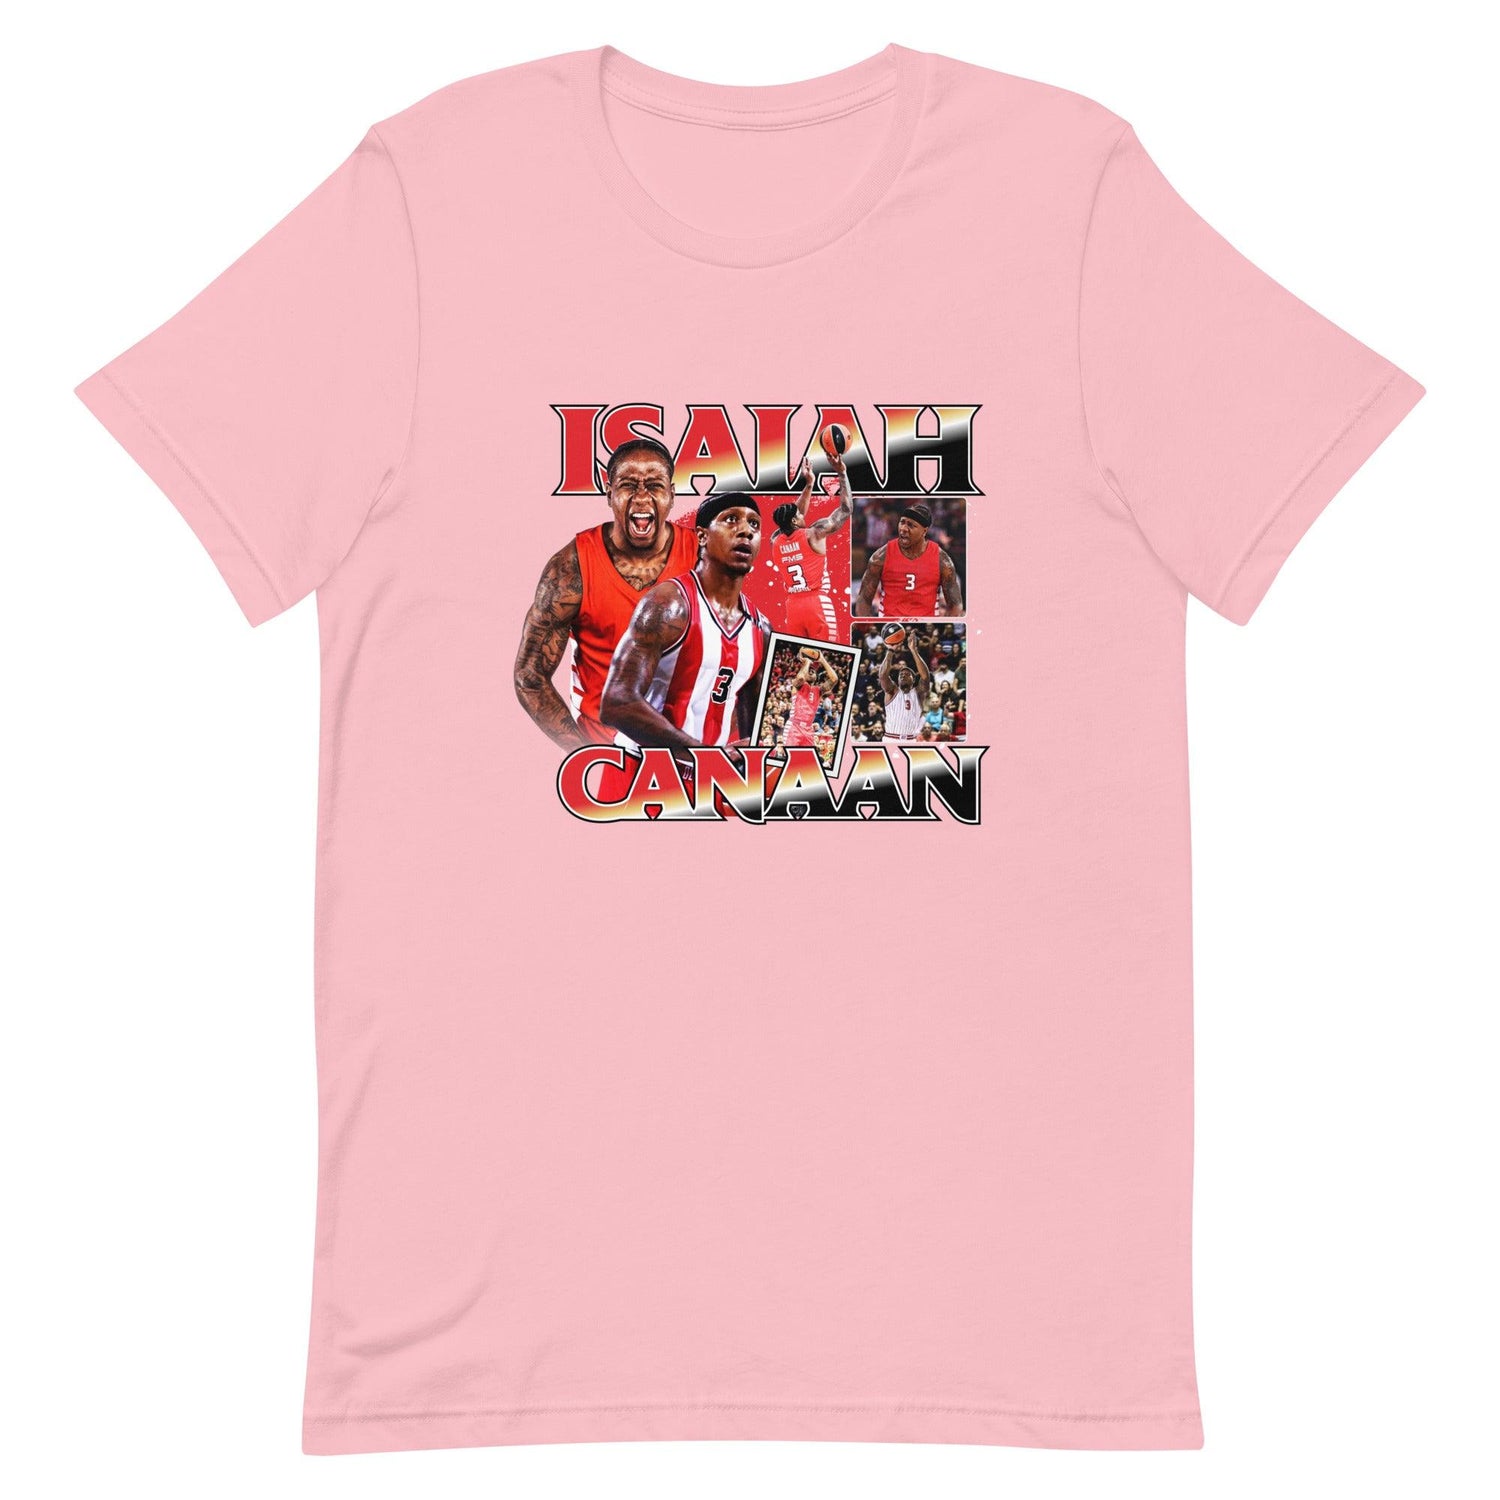 Isaiah Canaan "Vintage" t-shirt - Fan Arch